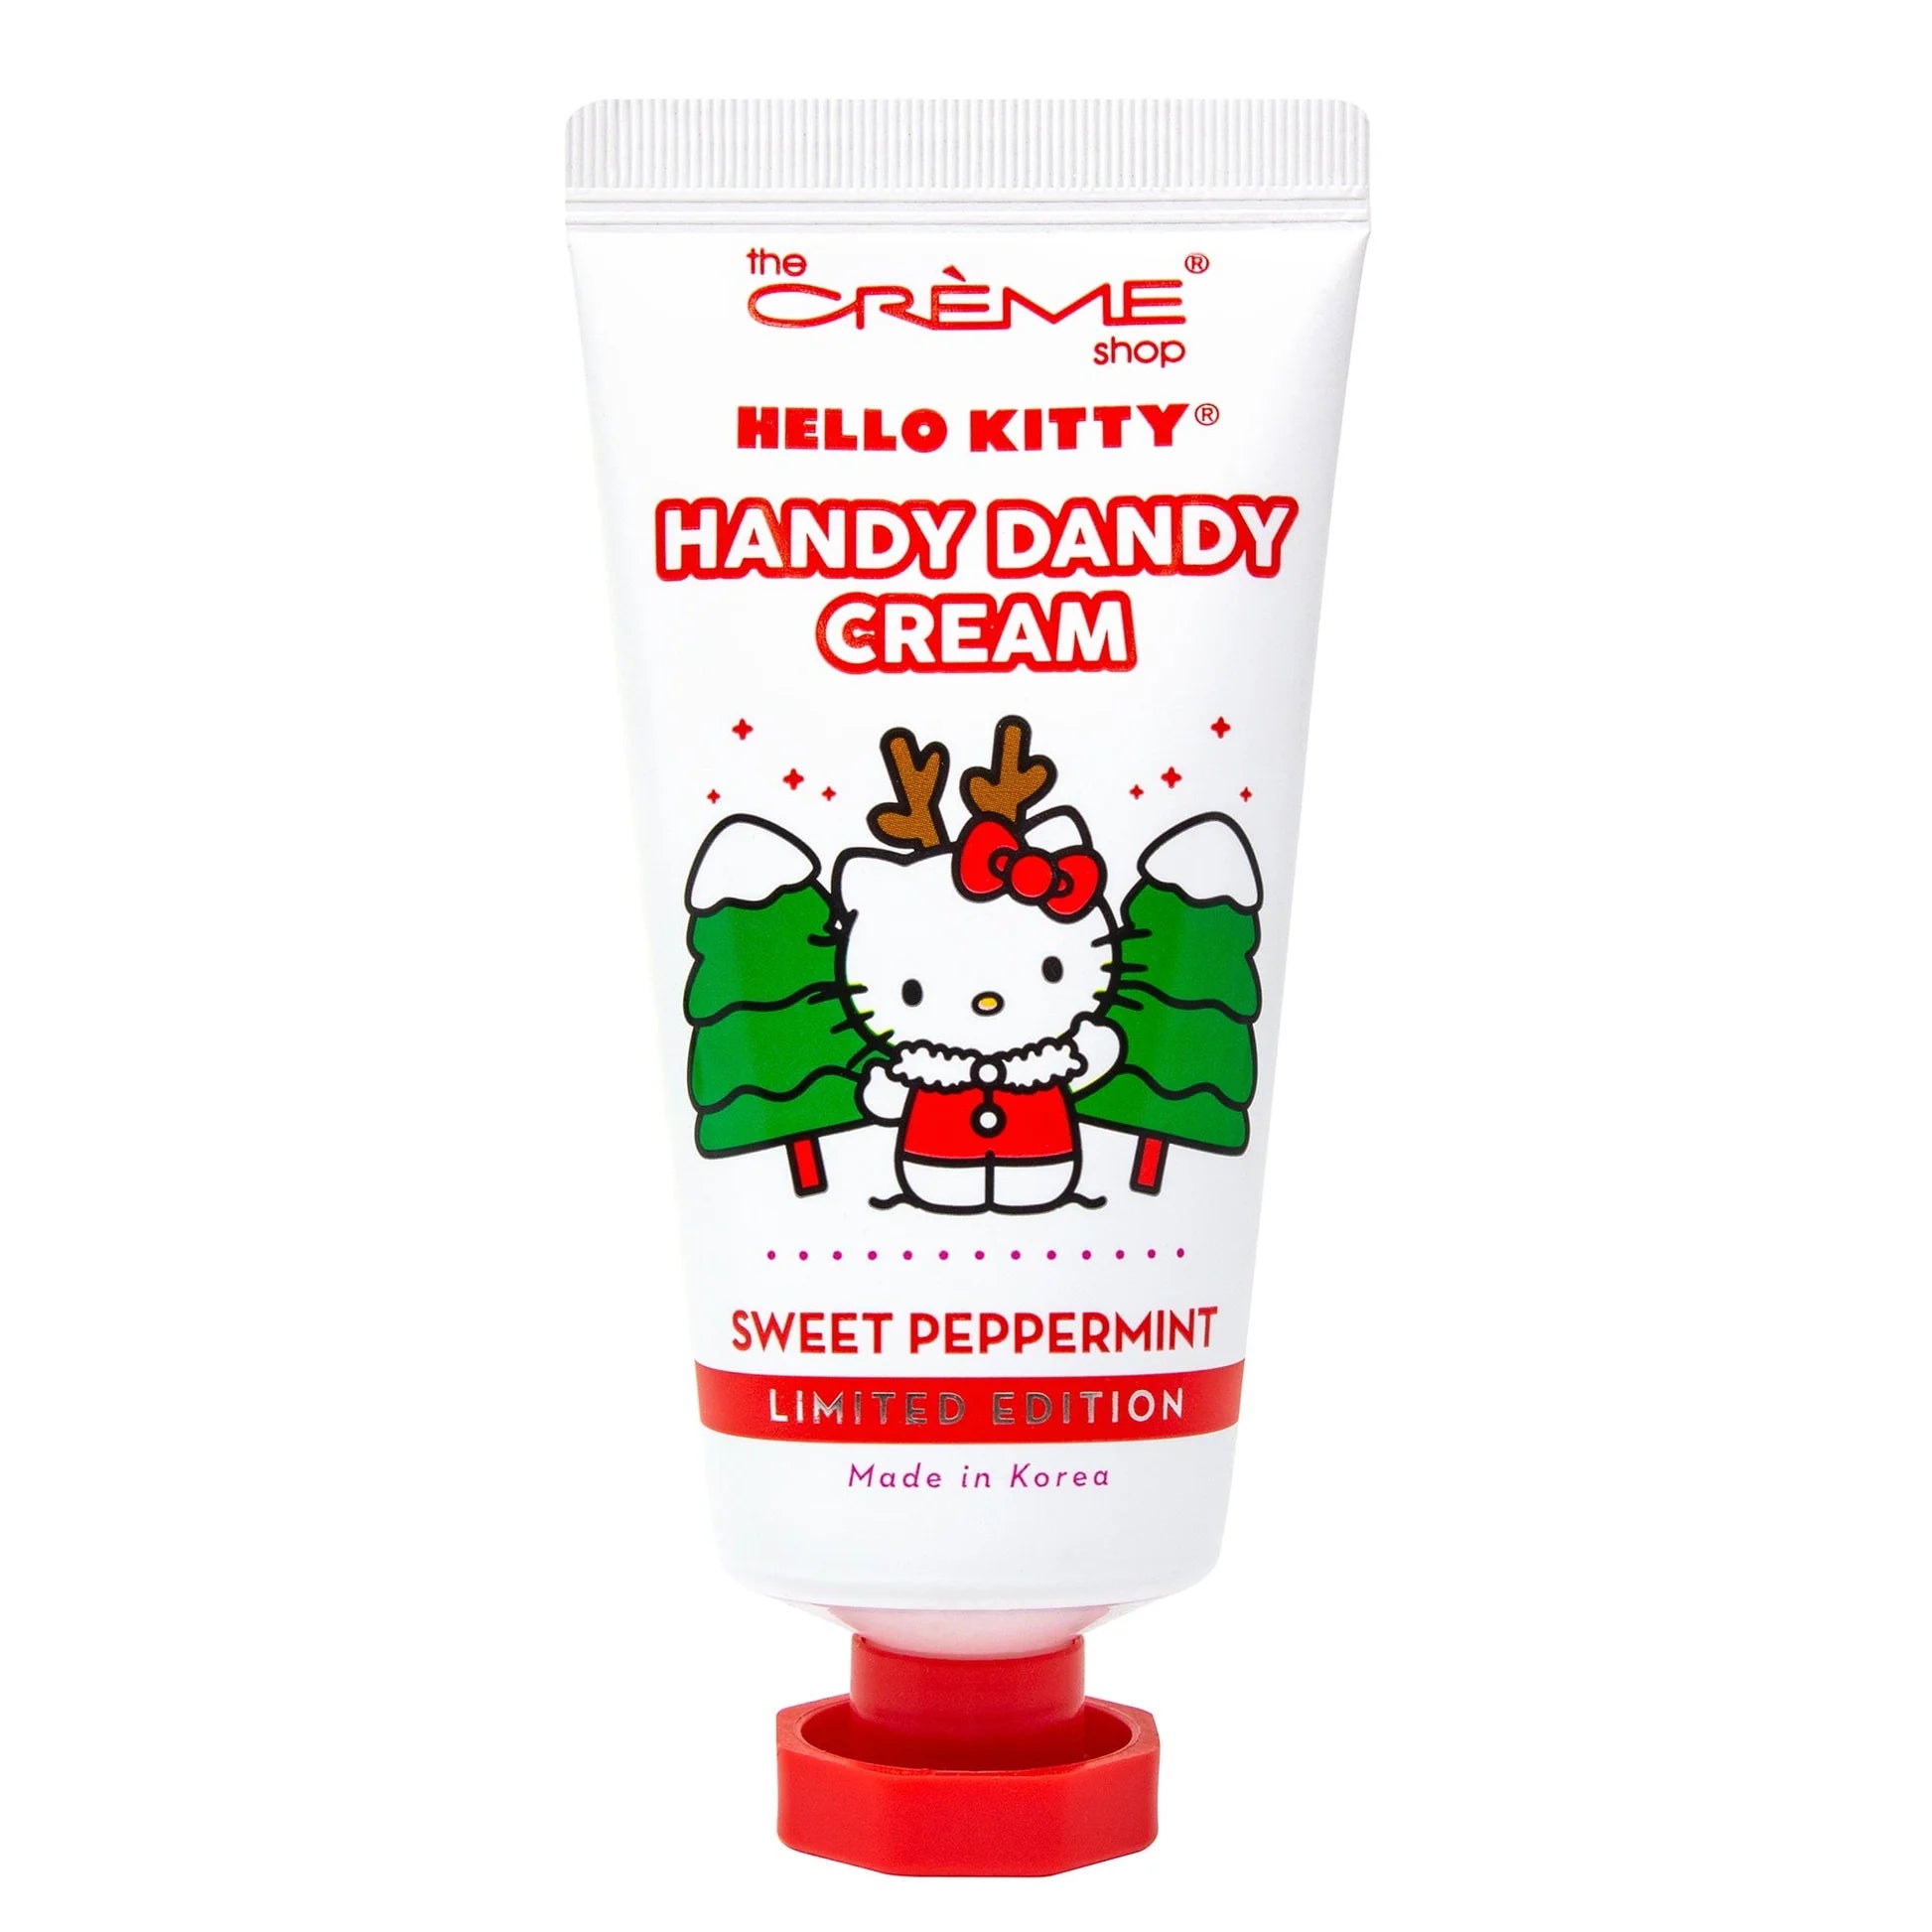 The Creme Shop - Hello Kitty and Friends Holiday Handy Dandy Creme Set